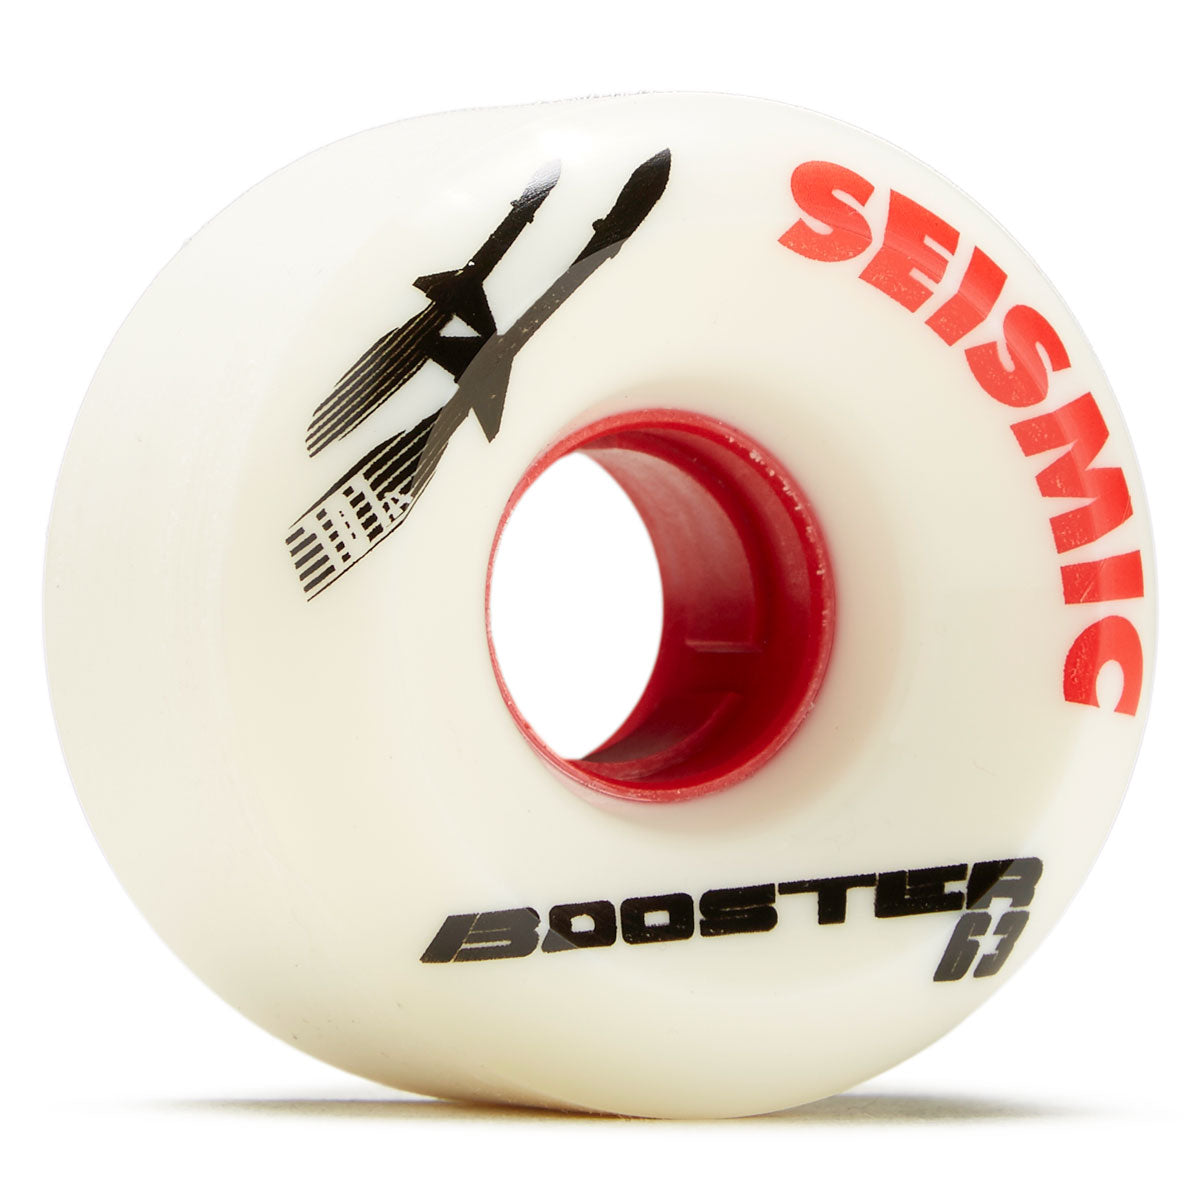 Seismic Booster 101a Longboard Wheels - White - 63mm image 1